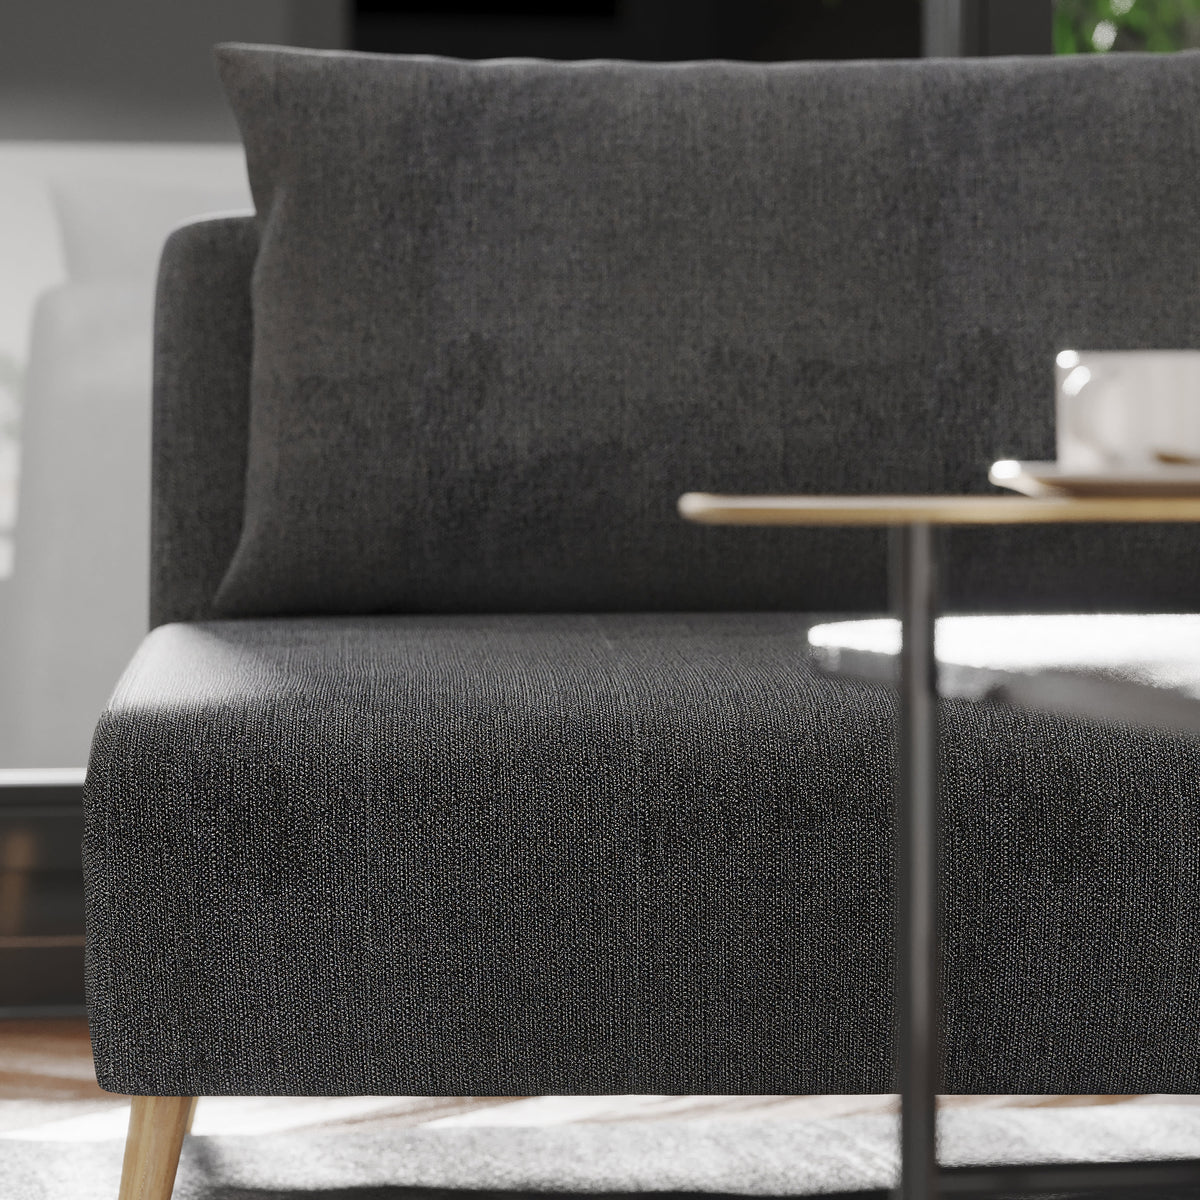 Dark Gray |#| Convertible Tri-Fold Chair with Pillow and Hideaway Legs in Dark Gray Fabric